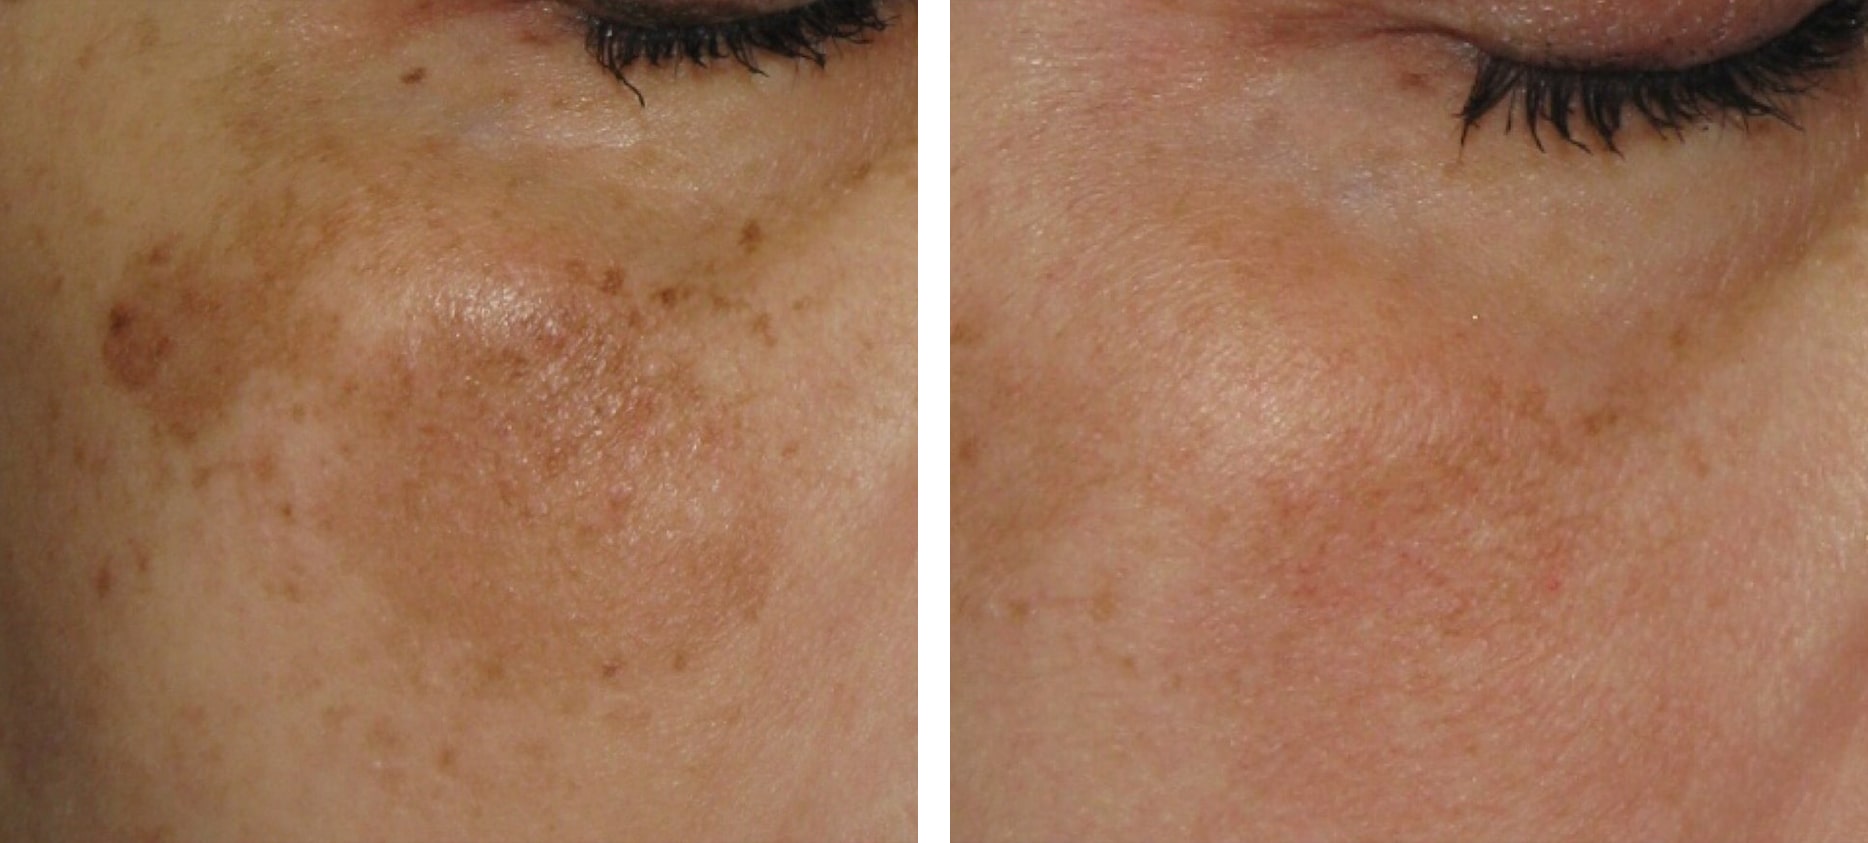 IPL before and after treatment at Kingsway Dermatology